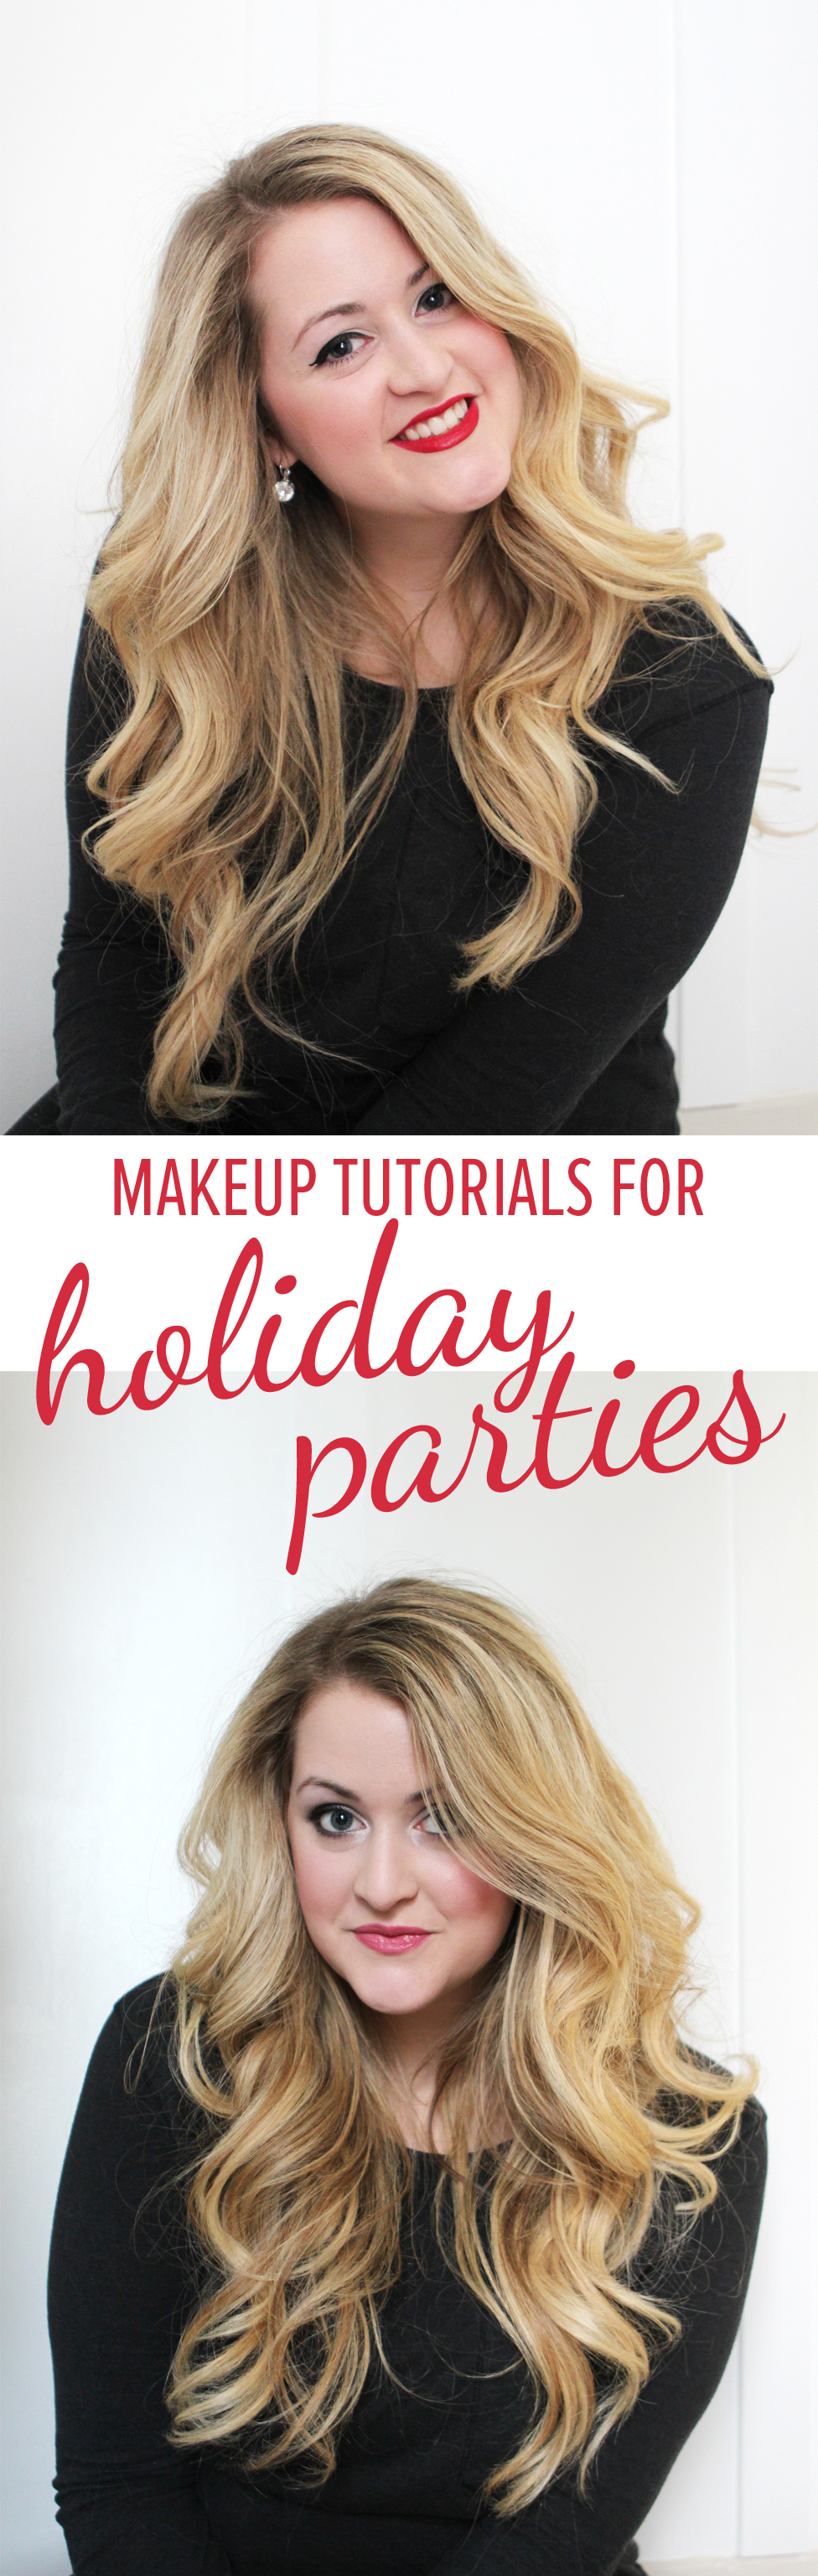 Two Makeup Looks for Holiday Parties | Alexandra Adams